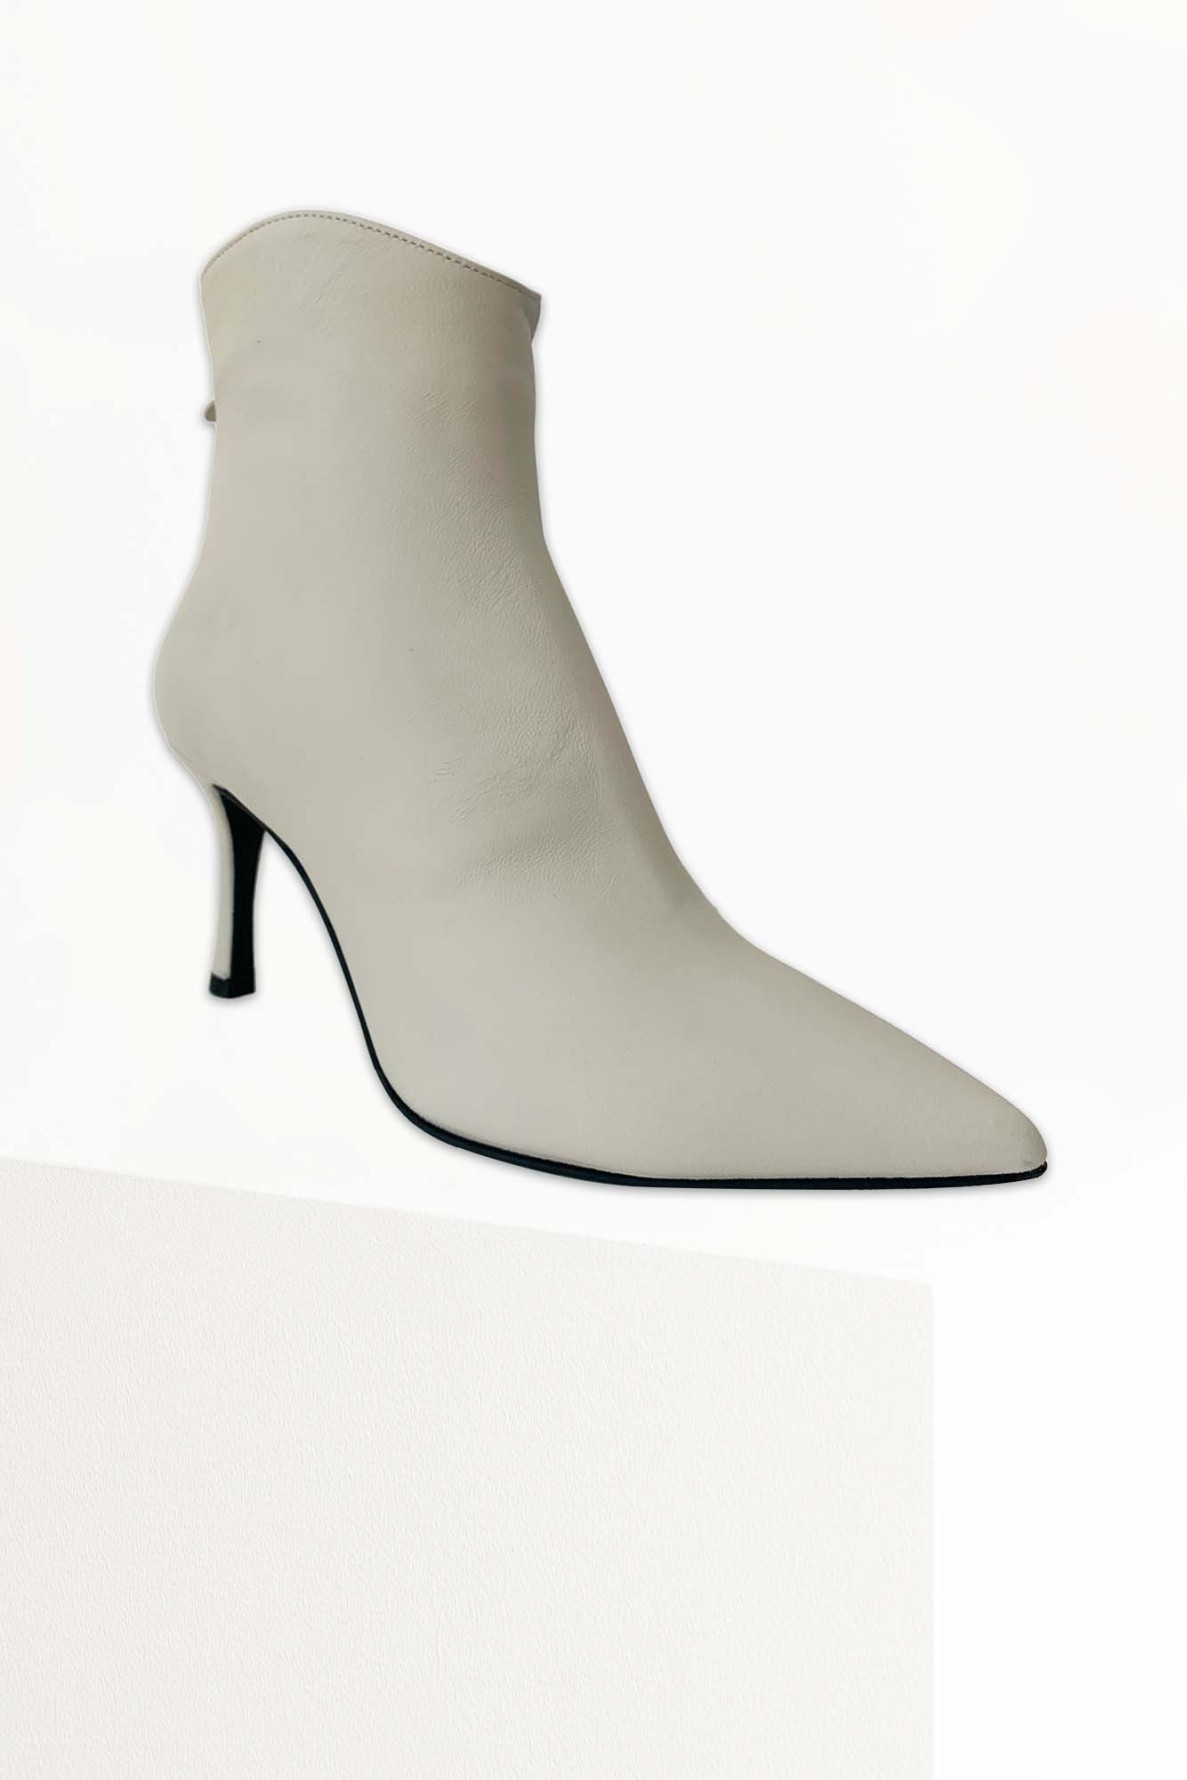 Heeled boots - No Concept - 3 